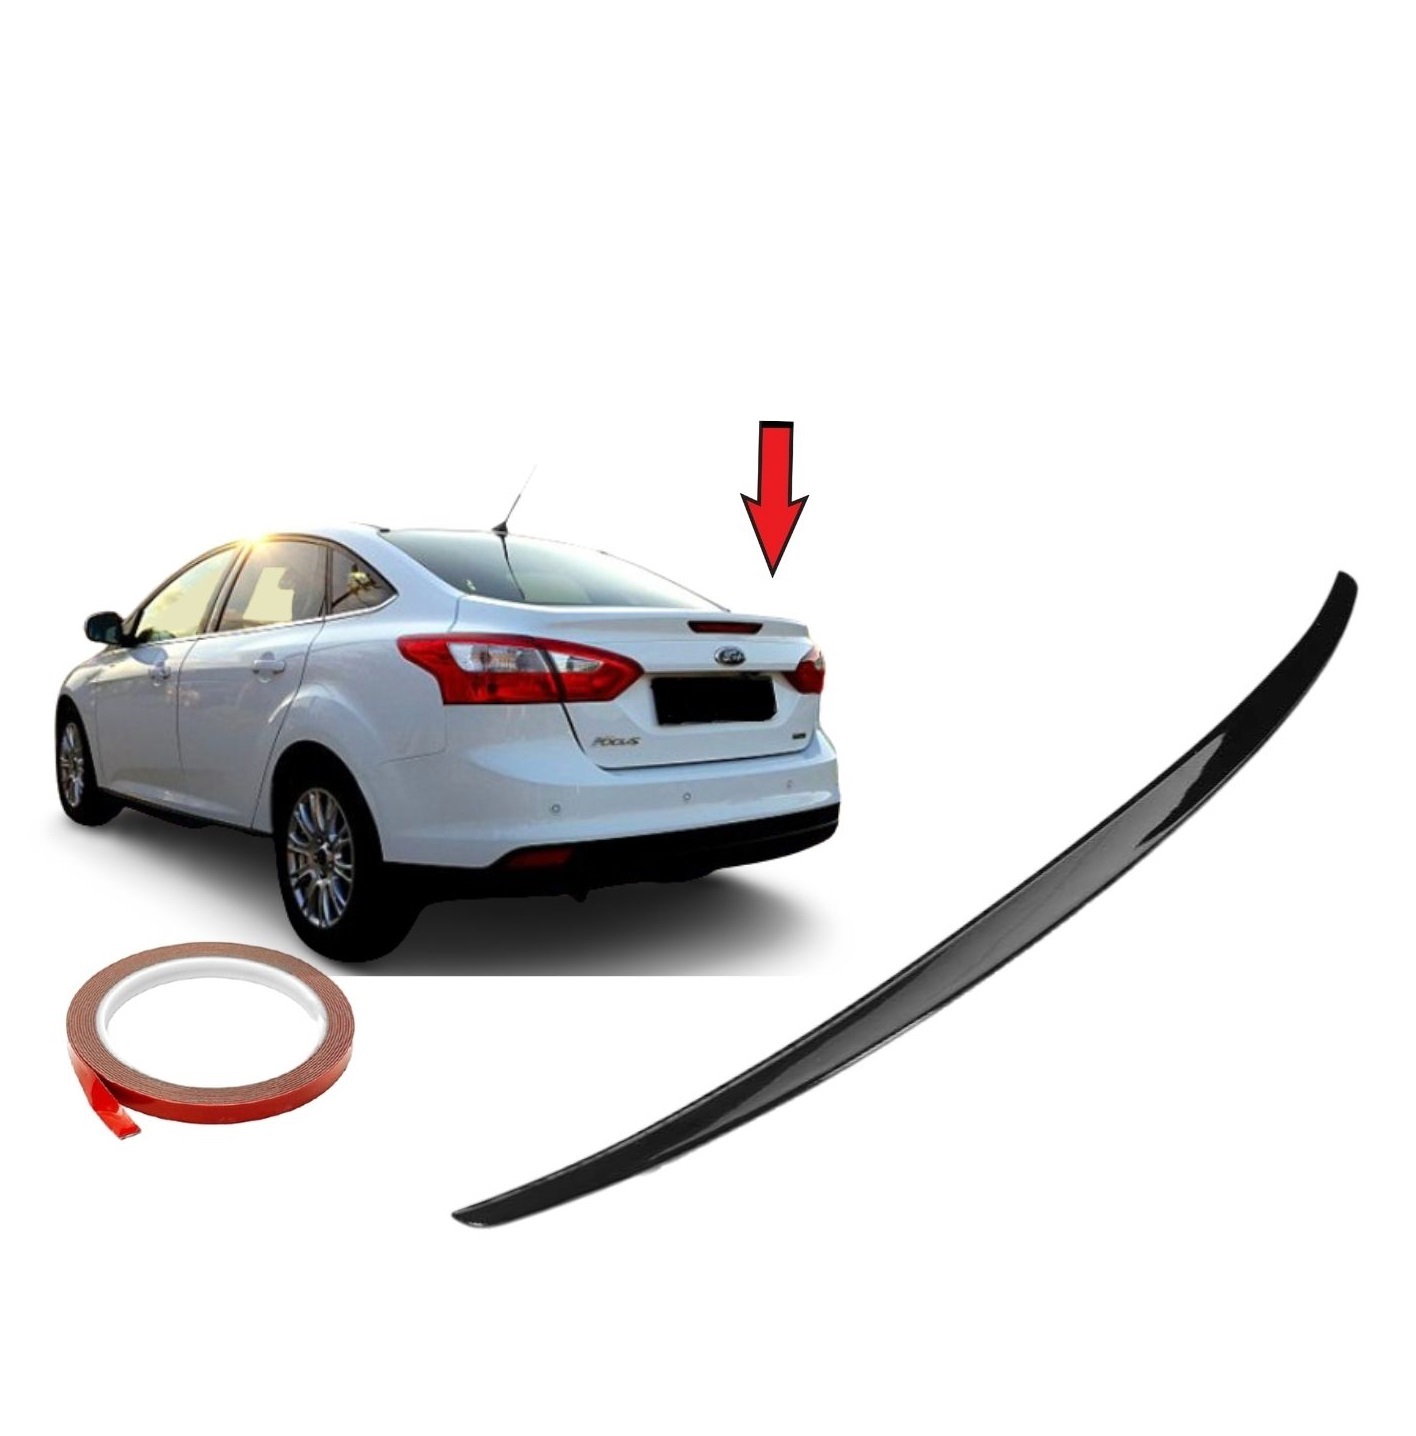 Spoiler Lip for FORD FOCUS 3 Glossy Black Rear Trunk Wing Lid 